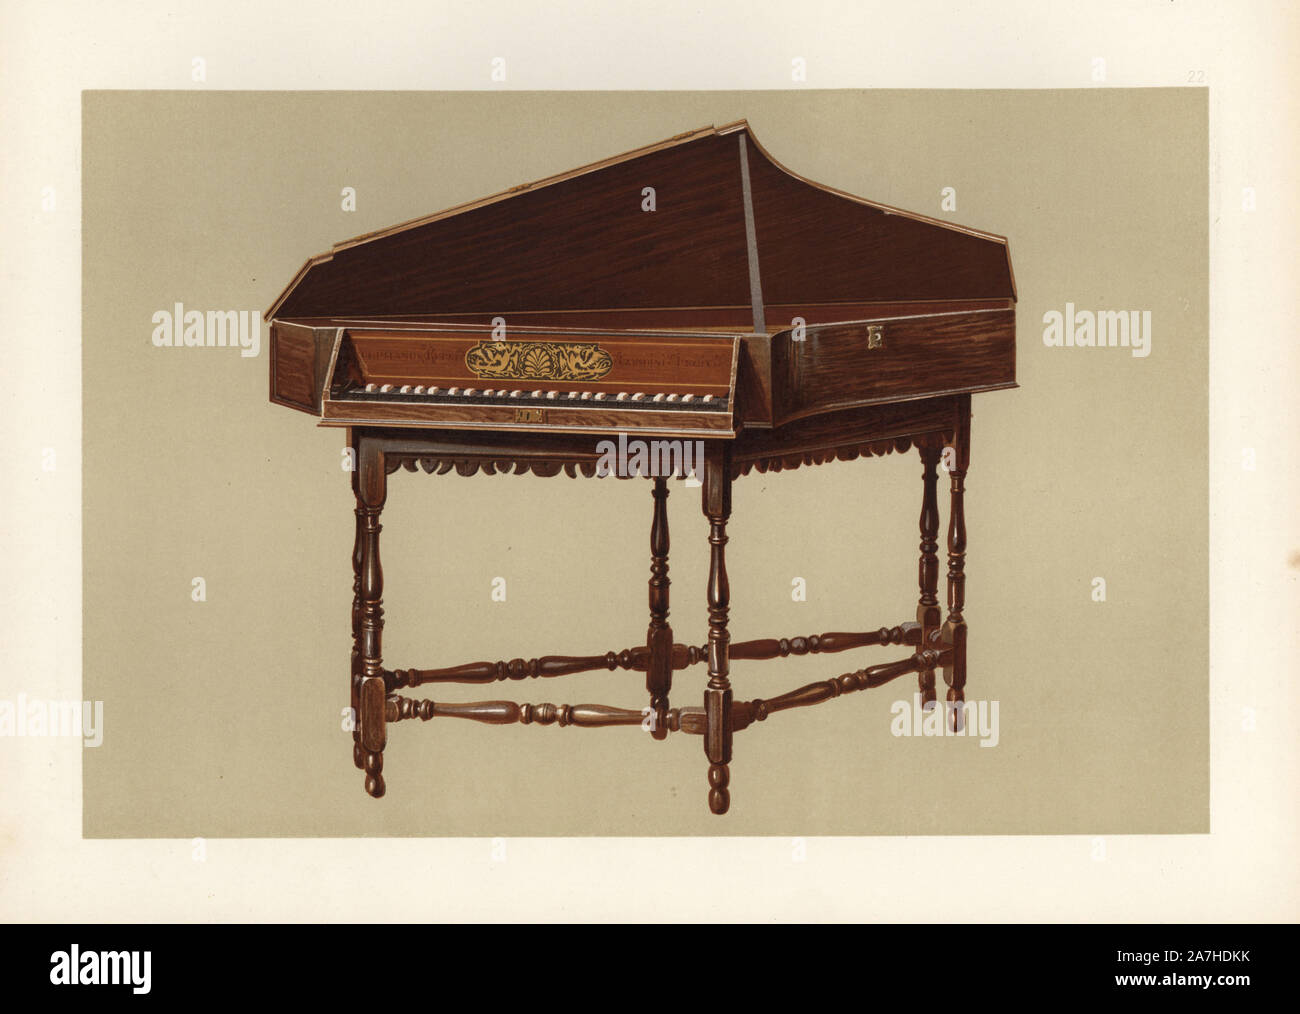 A transverse spinet with six legs made in London by Stephen Keene at the end of the 17th century. Keene was a well-known maker of 'harpsycons and virginals' from at least 1671 to 1719.  Chromolithograph from an illustration by William Gibb from A.J. Hipkins' 'Musical Instruments, Historic, Rare and Unique,' Adam and Charles Black, Edinburgh, 1888. Alfred James Hipkins (1826-1903) was an English musicologist who specialized in the history of the pianoforte and other instruments. William Gibb was a master illustrator and chromolithographer and illustrated 'The Royal House of Stuart' (1890), 'Nav Stock Photo